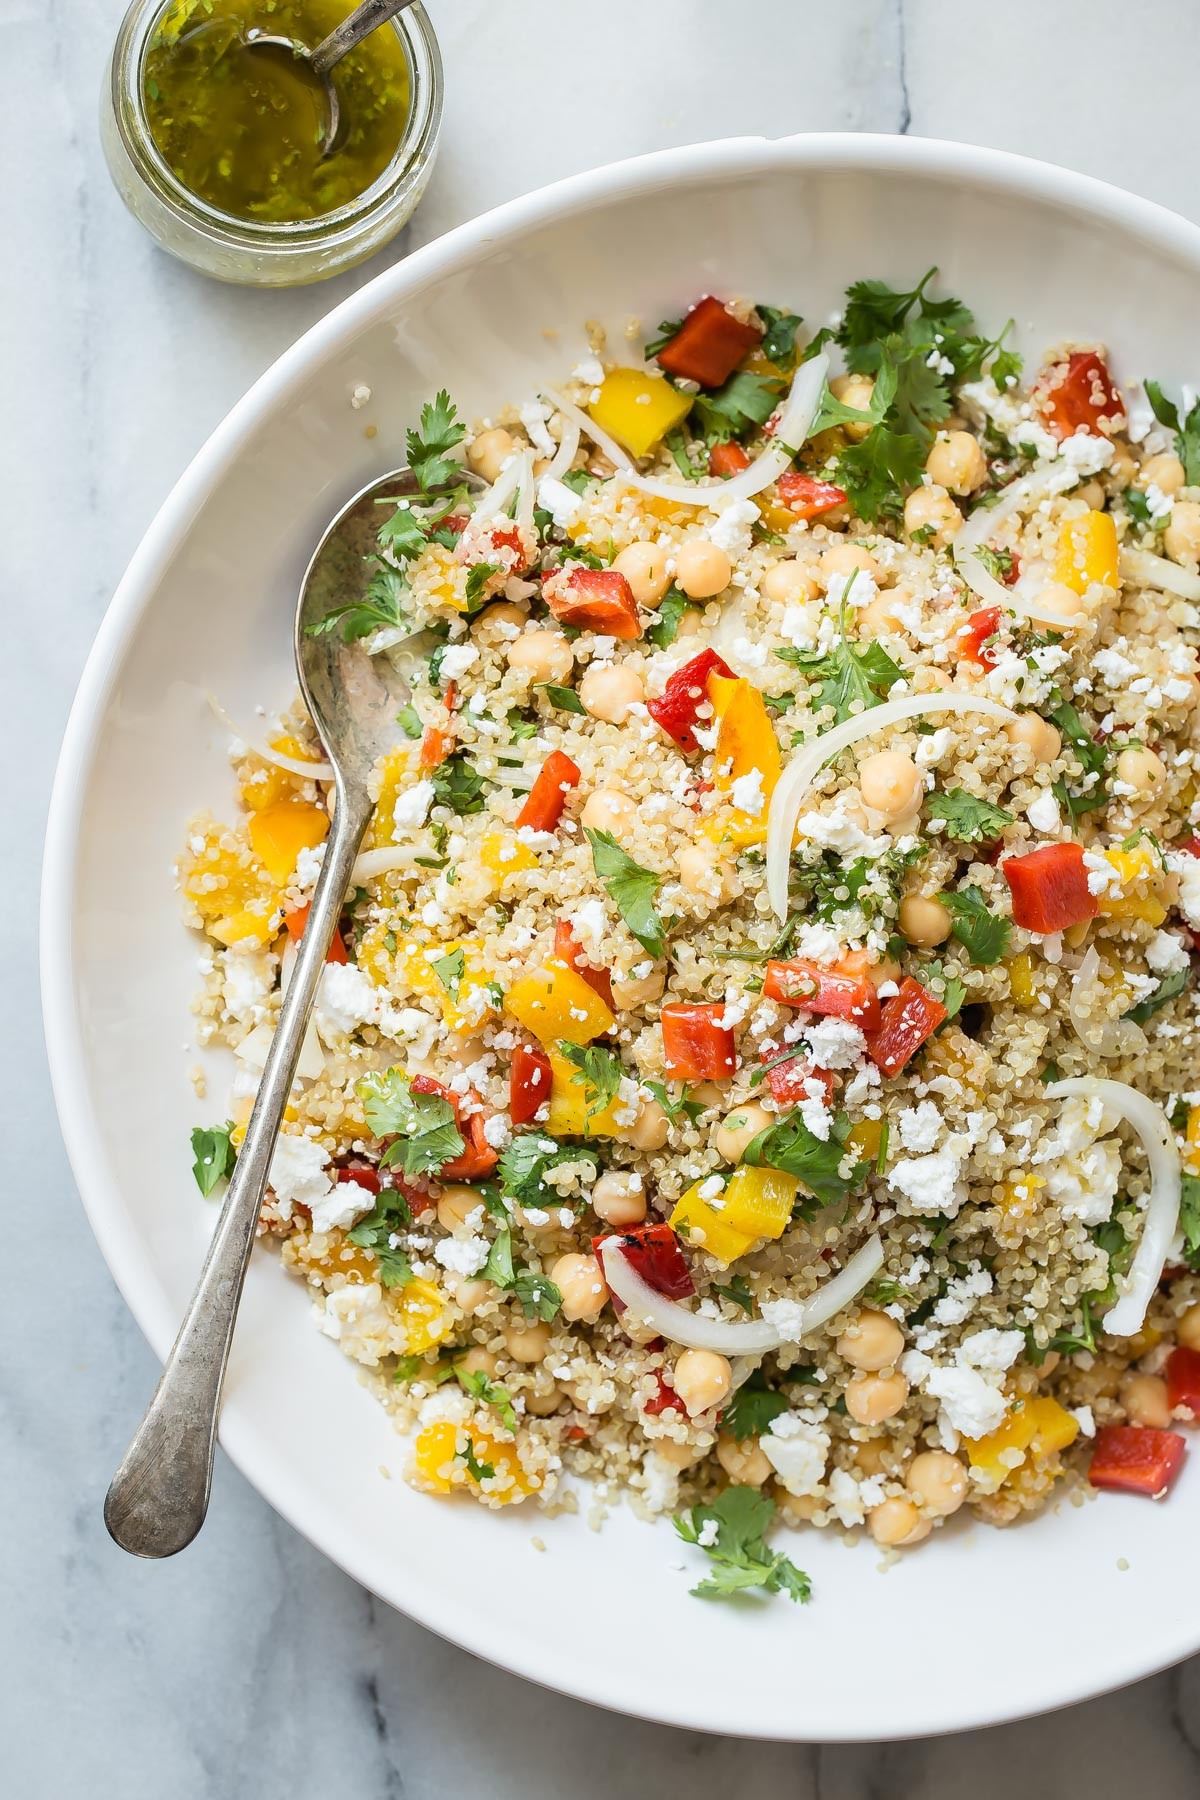 Quinoa Salad Healthy the 20 Best Ideas for Healthy Quinoa Salad with Feta Cheese